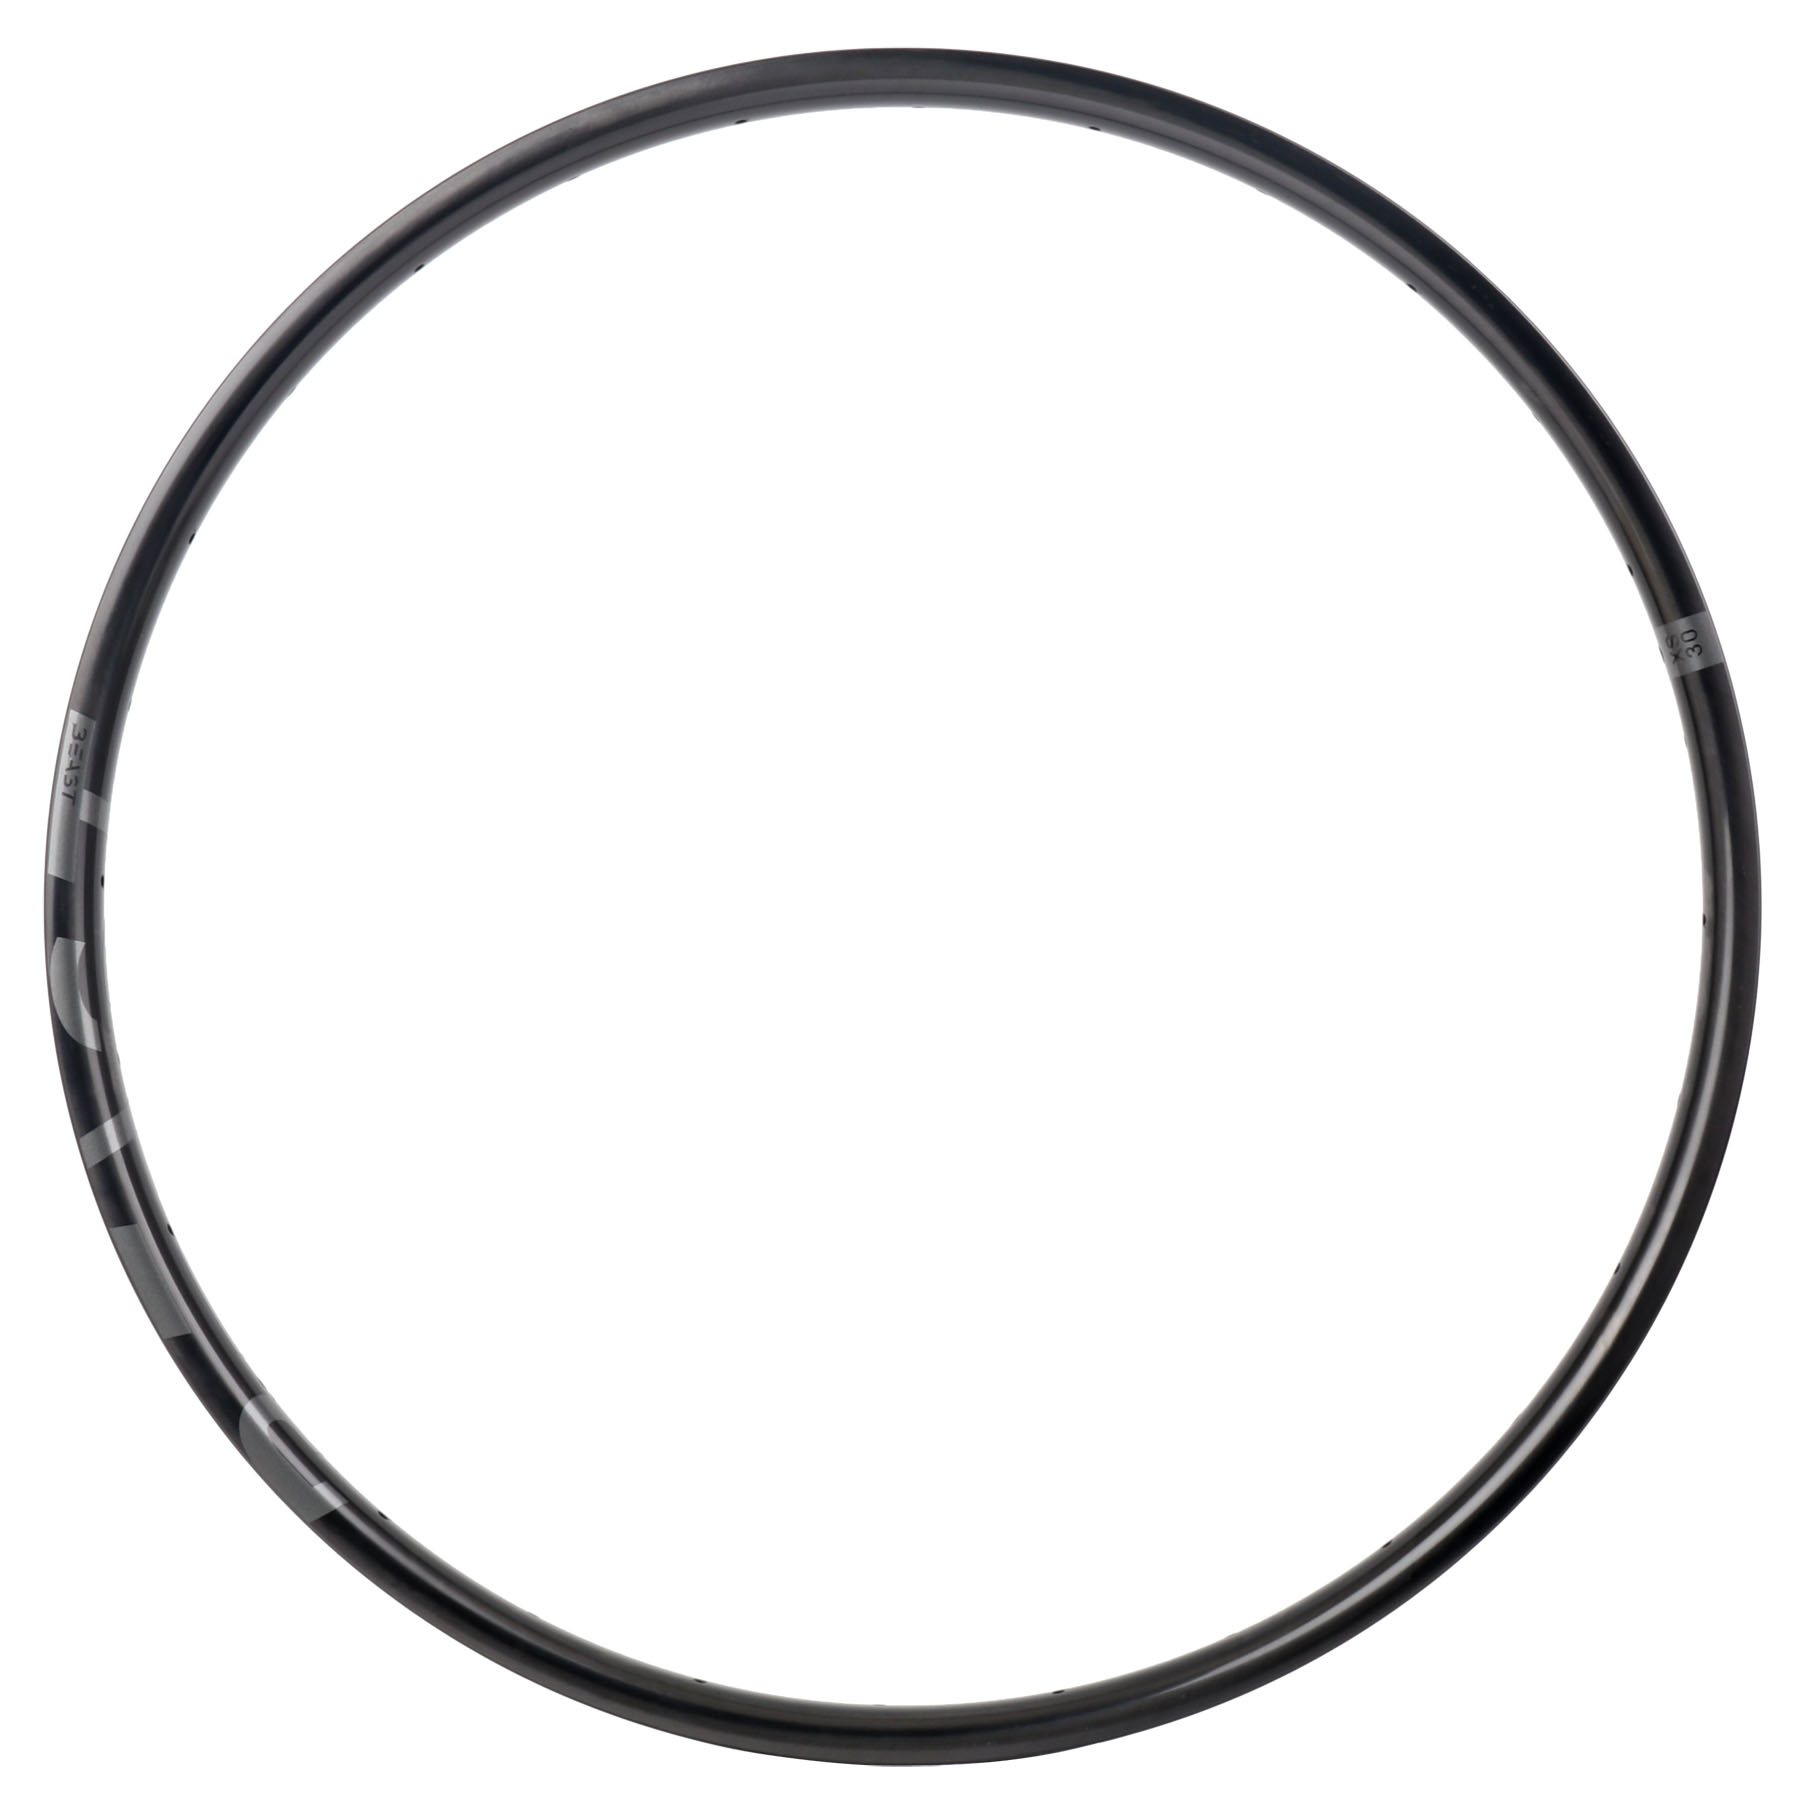 Picture of Beast Components XS30 29 Inch Carbon MTB Rim - UD black